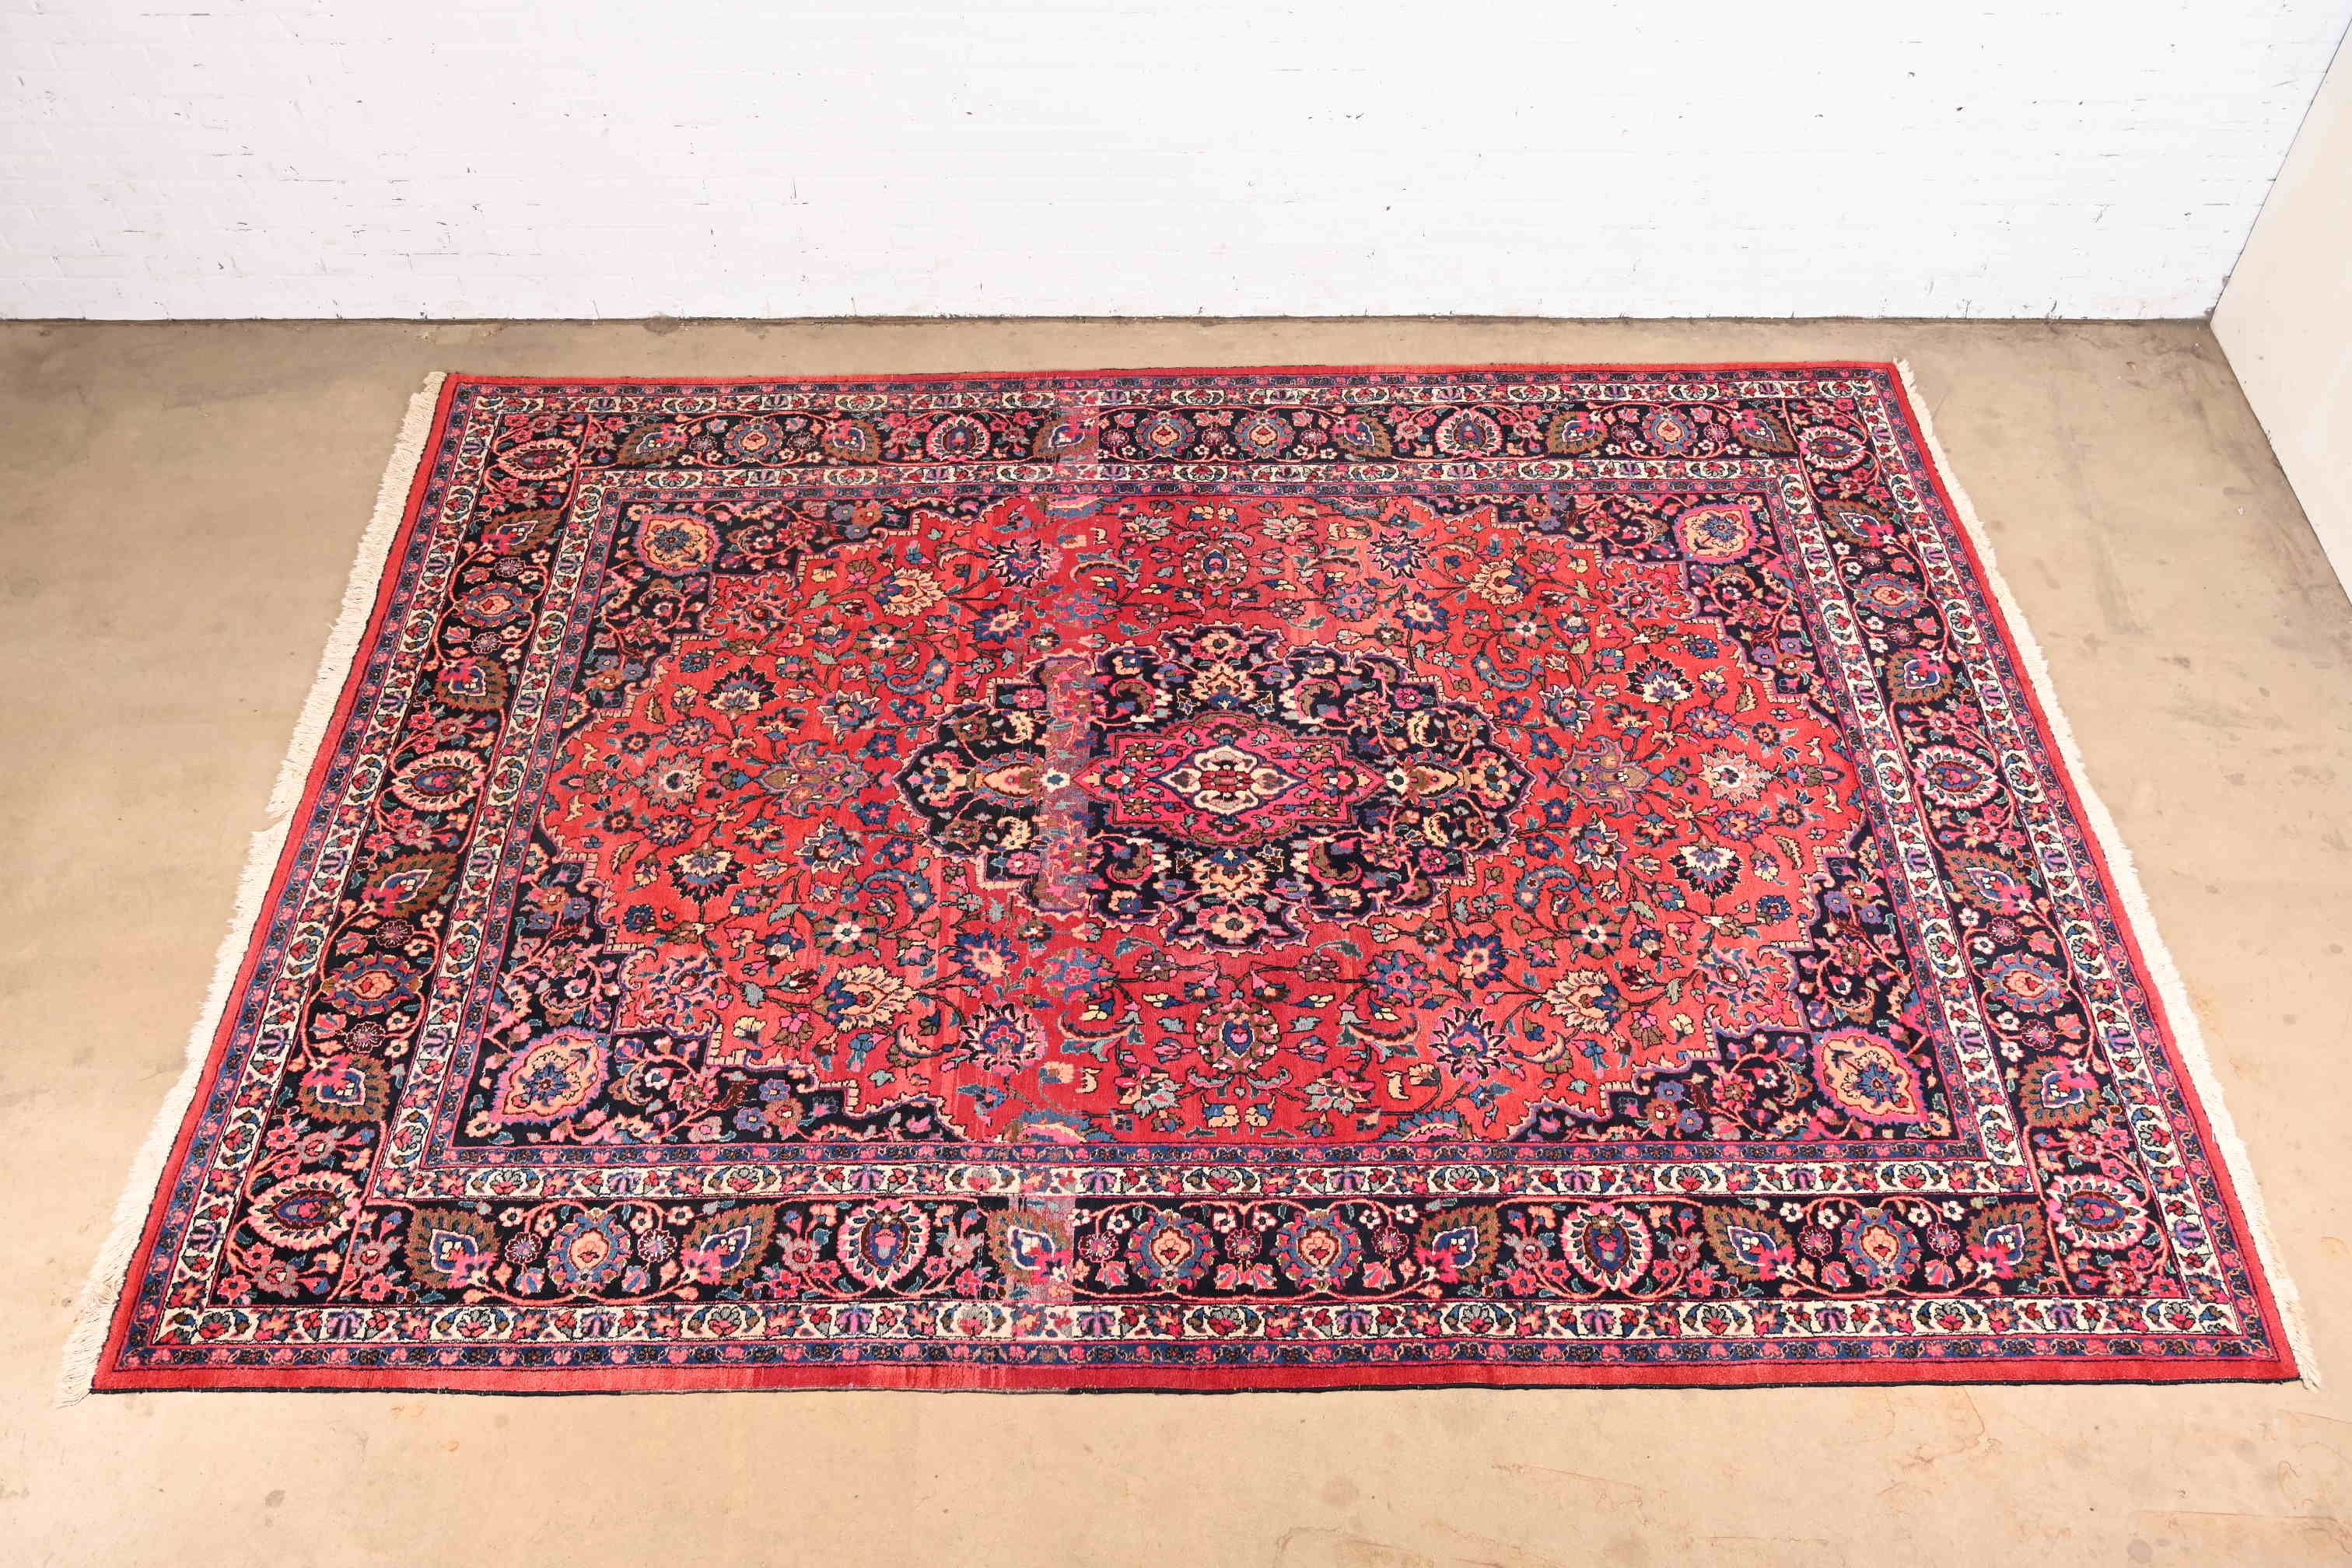 A gorgeous and vibrant vintage hand knotted Persian Tabriz room Size wool rug

Mid-20th century

Classic traditional floral design, with predominant colors in red, blue, pink, and ivory.

Measures: 8'7